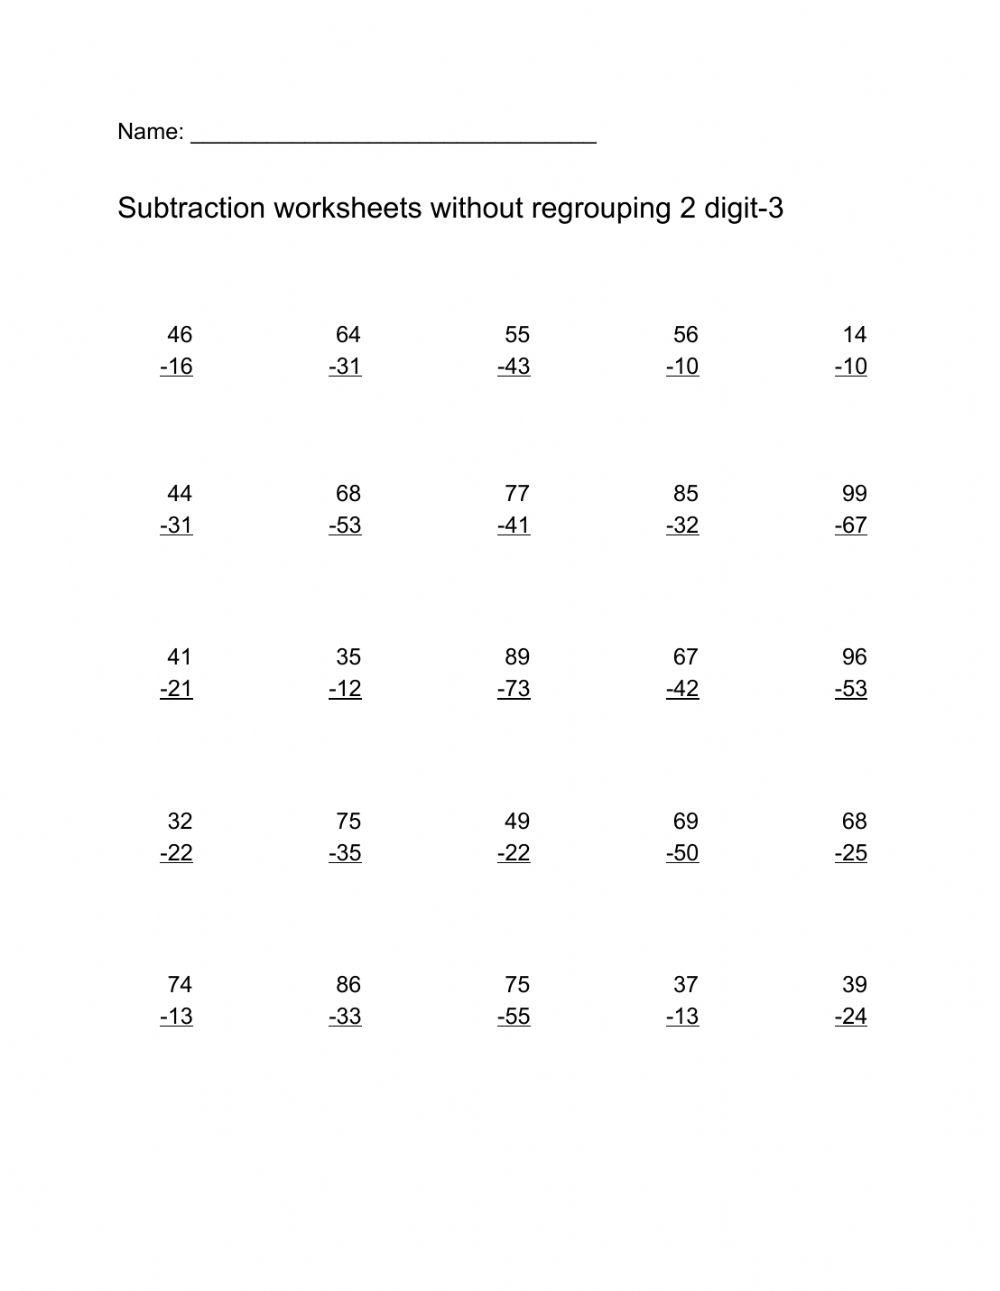 Subtraction worksheets without regrouping 2 digit-3